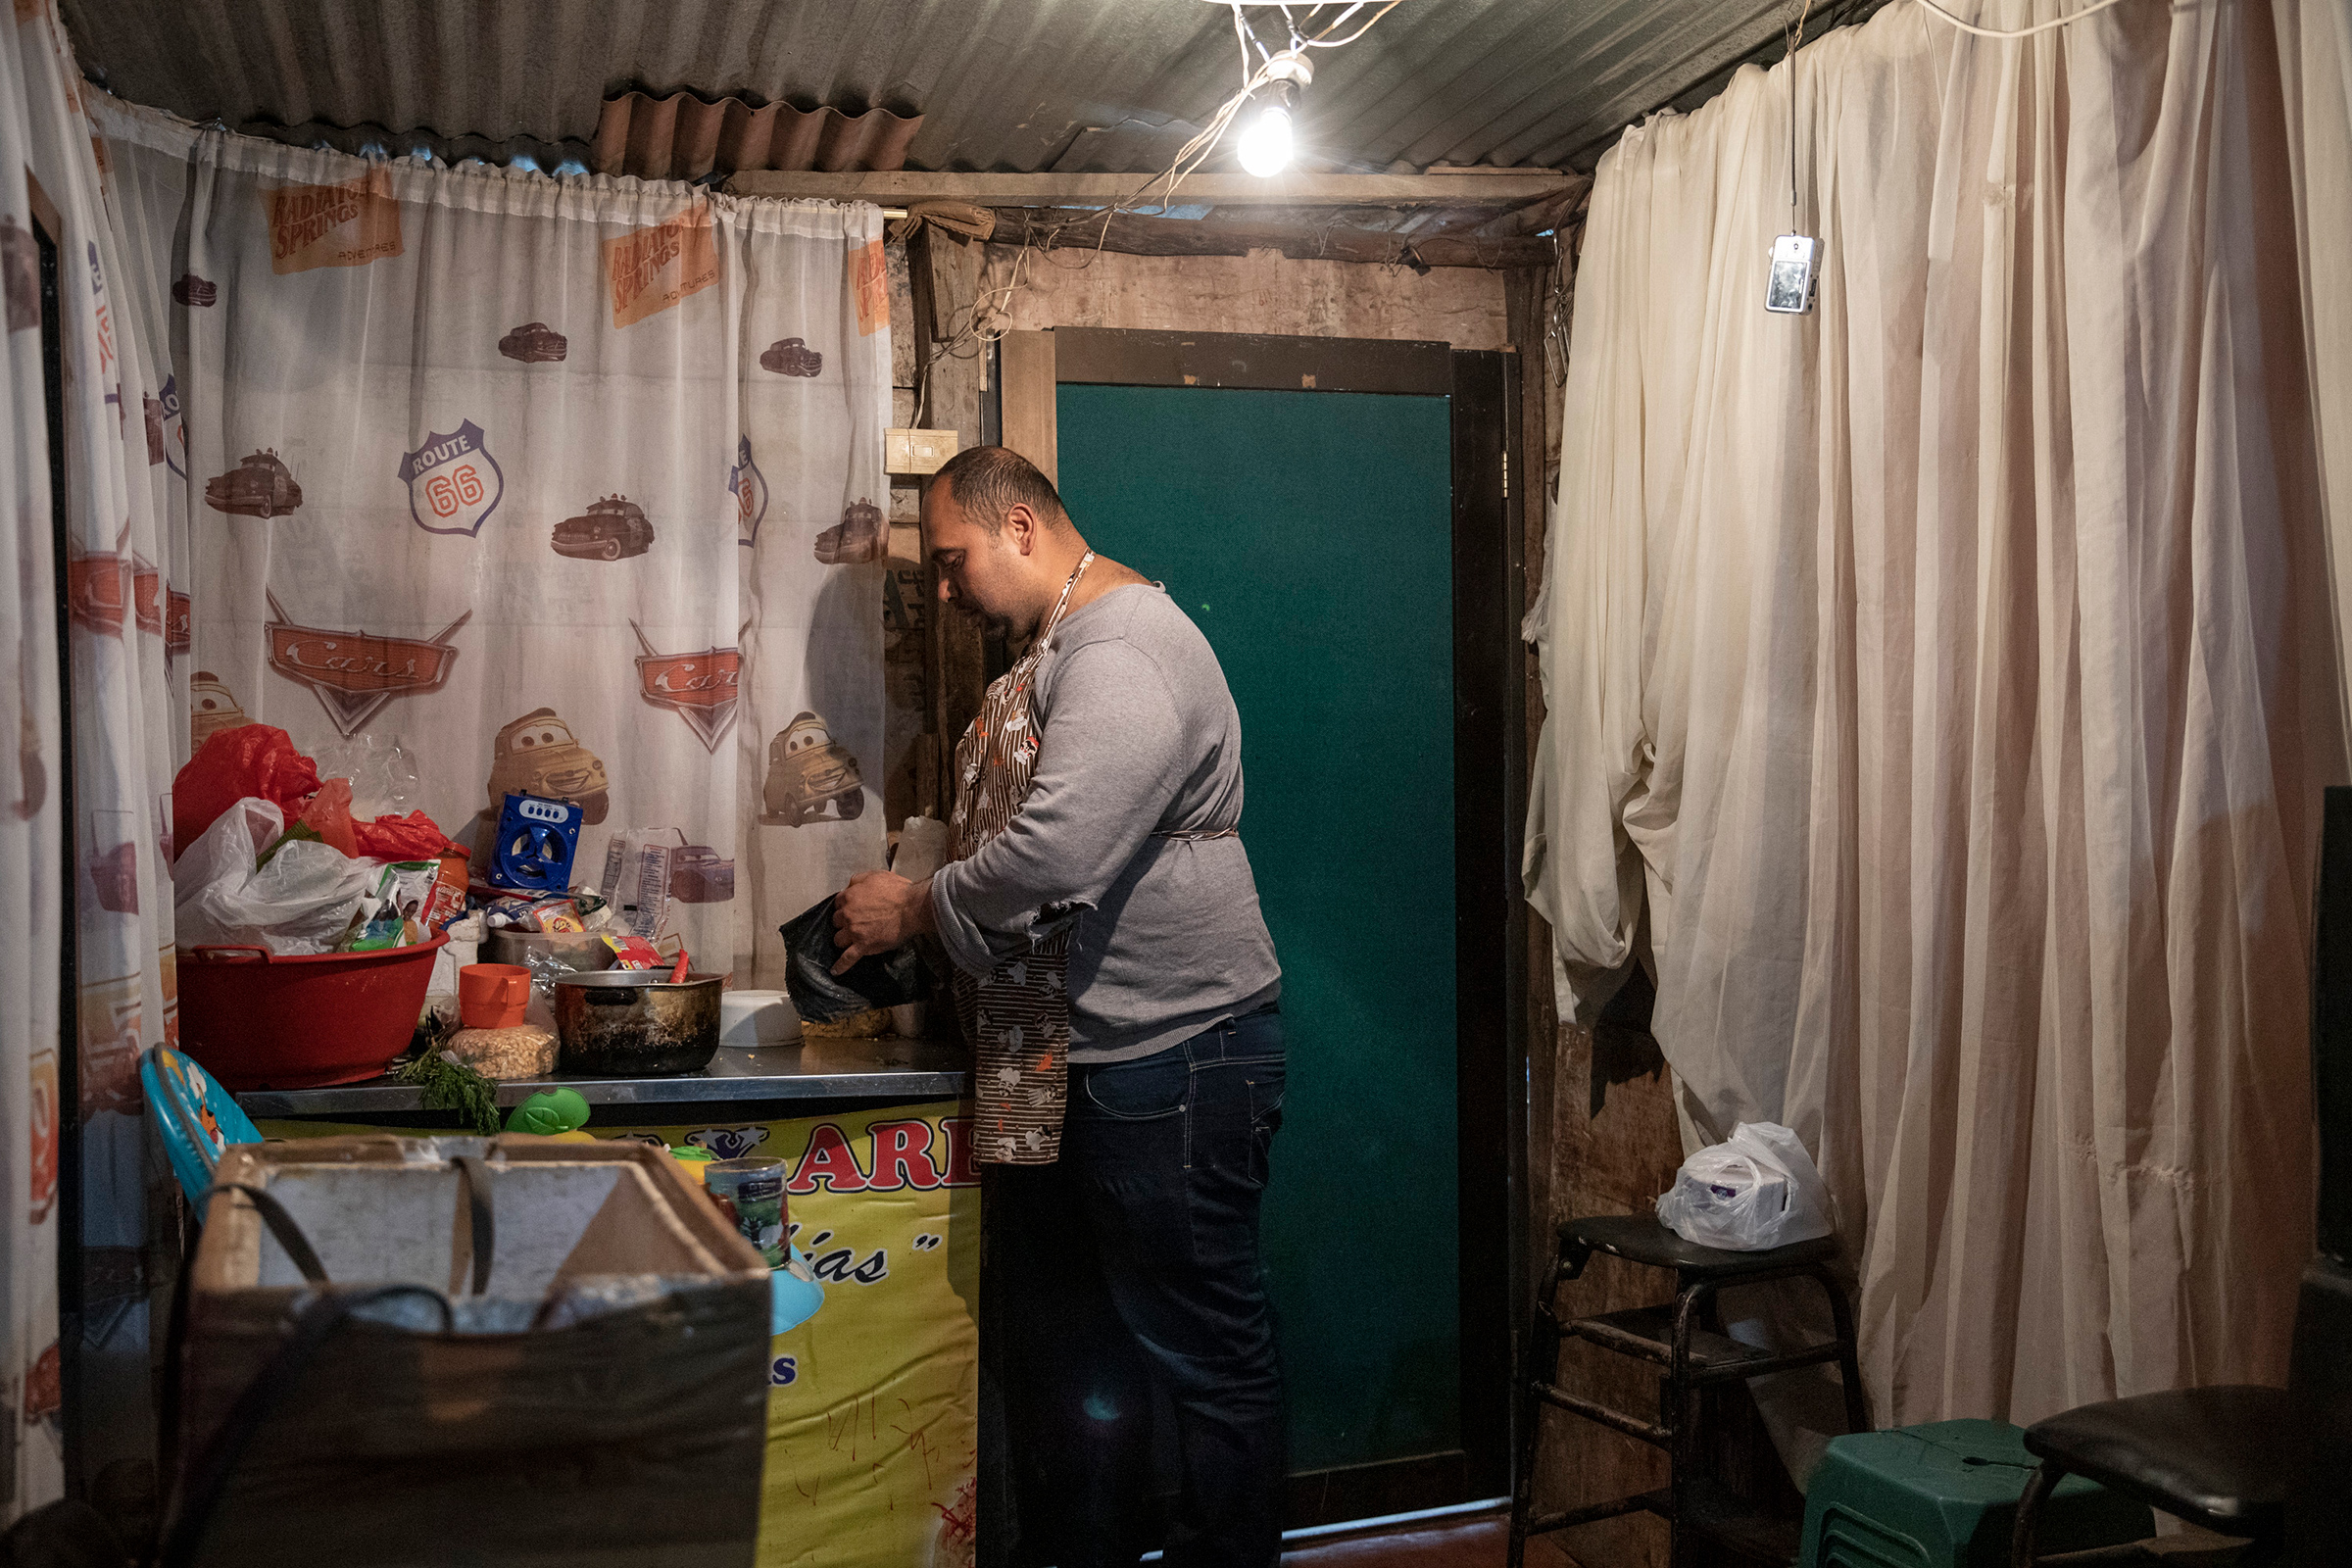 Nixon Valera, who arrived in 2018, wakes at 5:30 a.m. every day to make empanadas to sell on the streets of Bogotá; in Venezuela, he worked in the plastics industry.